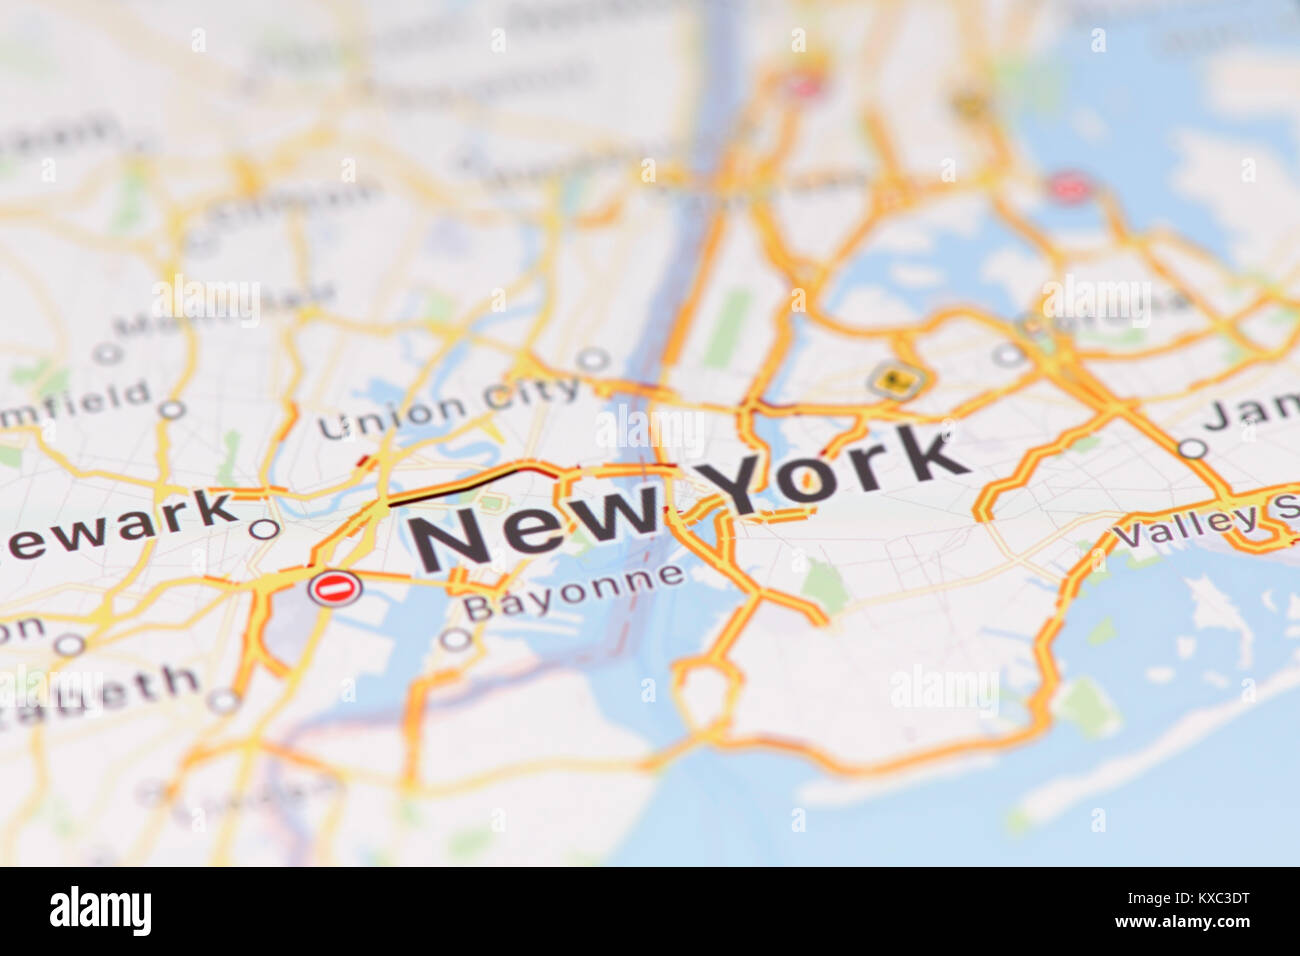 Closeup of New York city map on the screen of a GPS device, Apple iPhone maps app Stock Photo